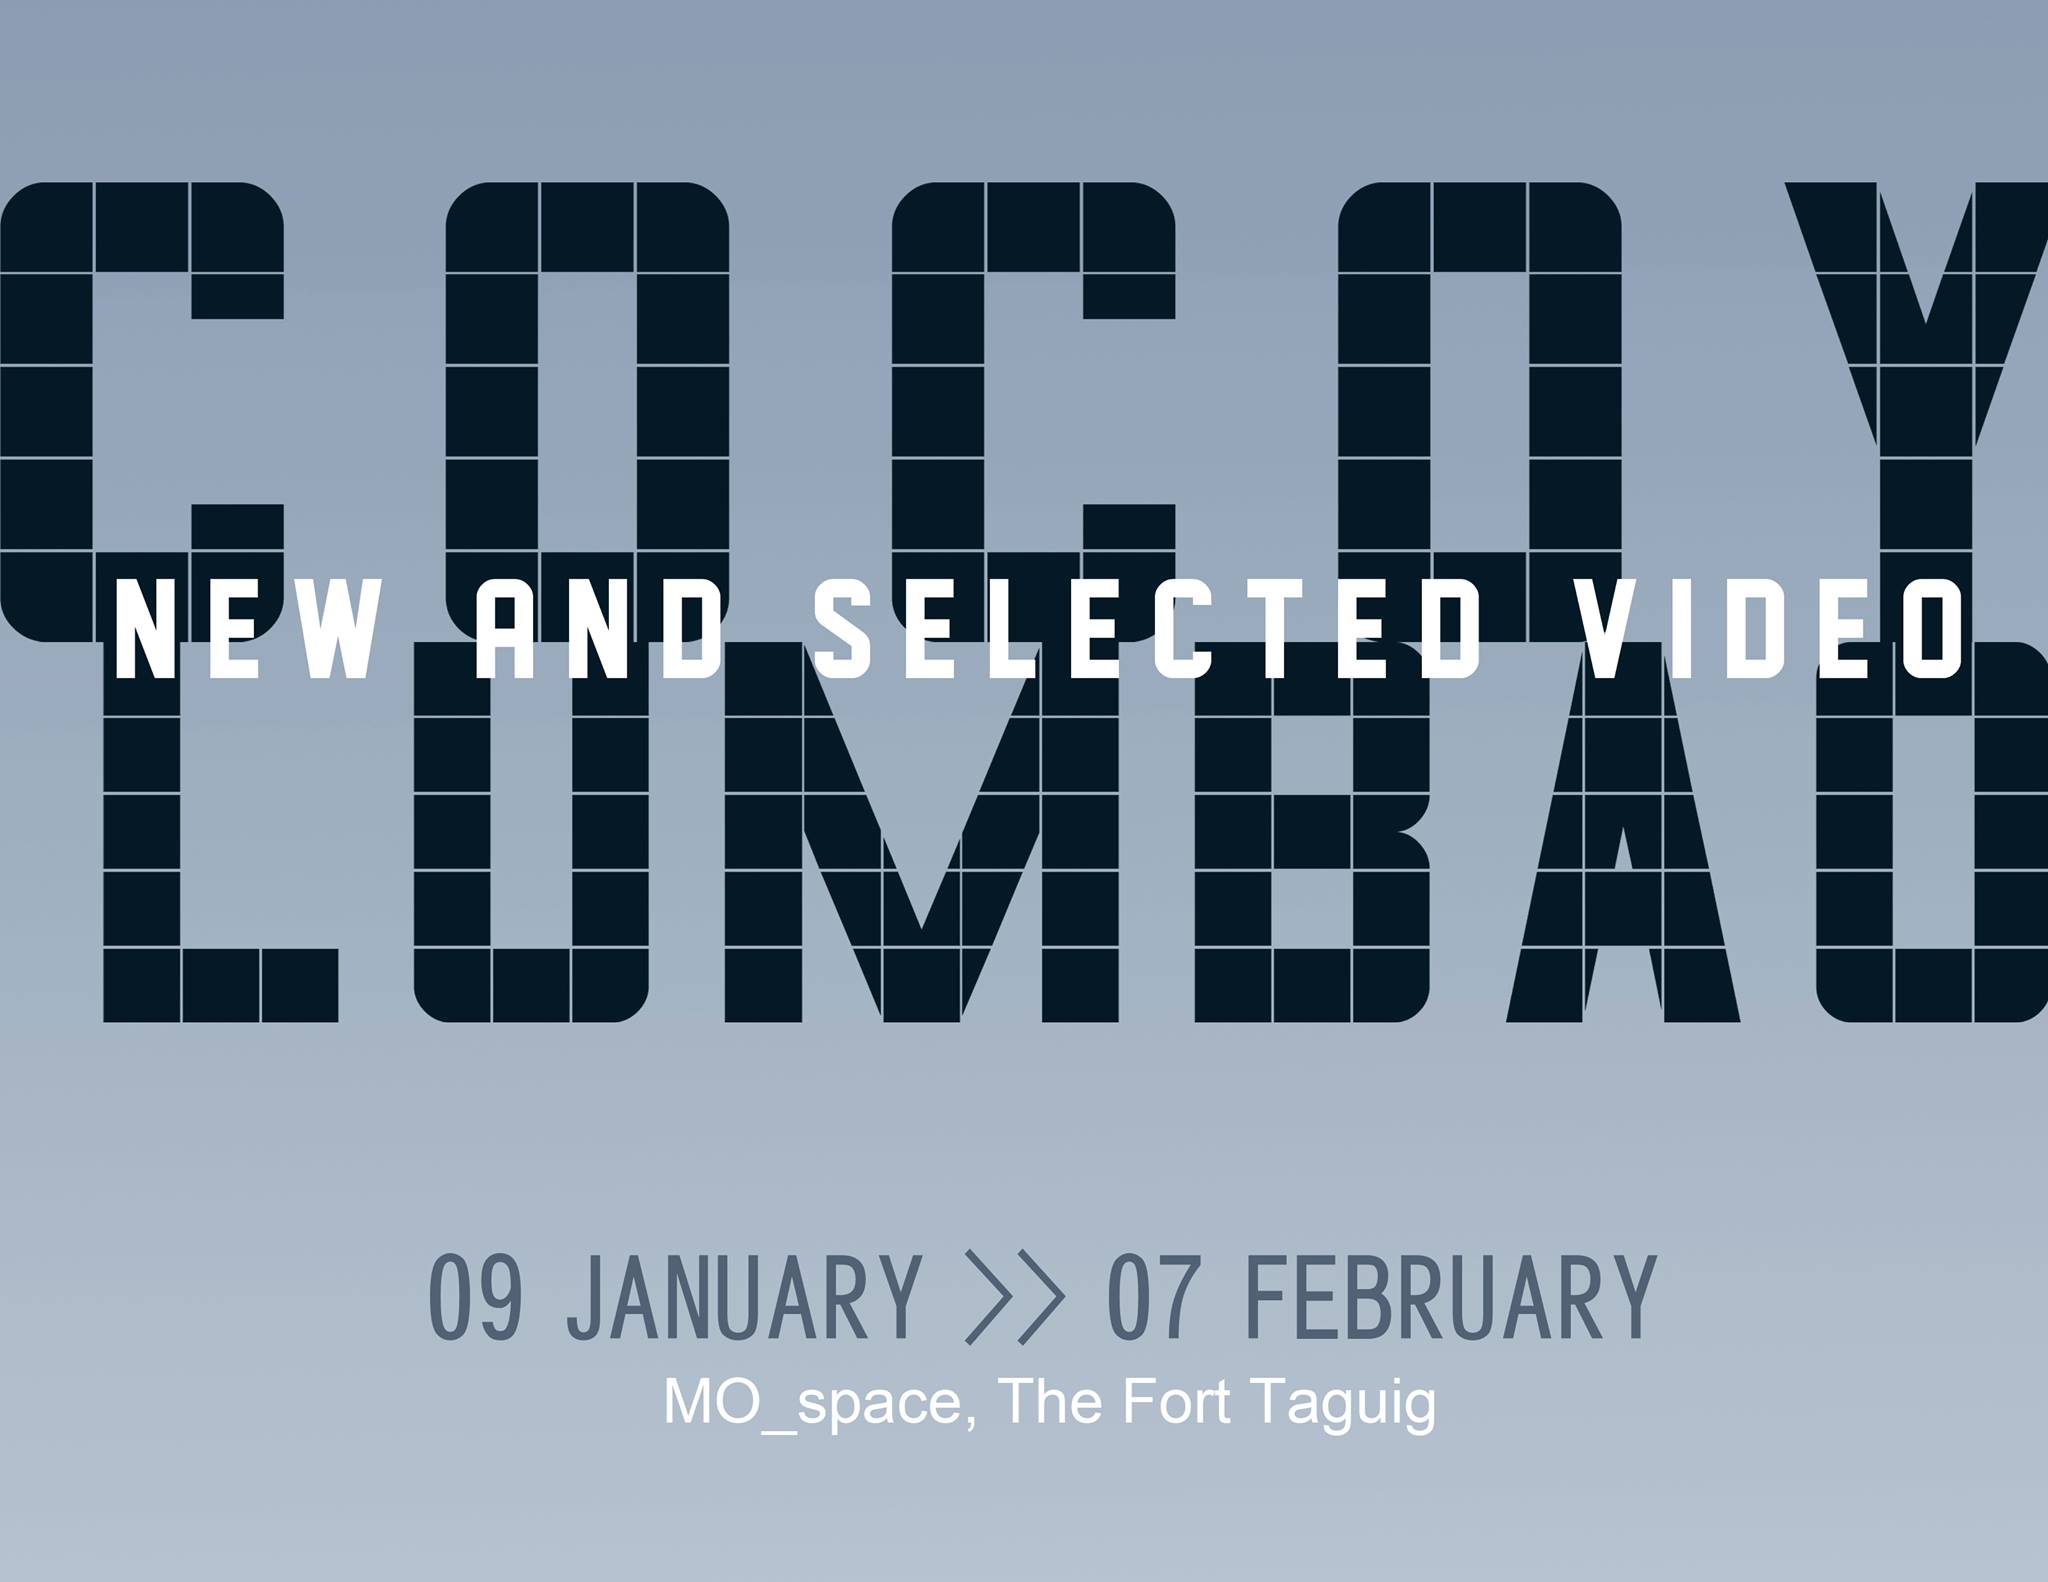 Cocoy Lumbao: New and Selected Video clock Saturday, January 9, 2016 at 6 PM 5 days from now · 86°F / 72°F Clear pin Show Map MO_Space 9th Avenue, Bonifacio High Street, 1634 Taguig, Philippines “If film is to painting, then video is to seeing.” Since the beginning, Cocoy Lumbao has chosen video as a medium because it represents everything he believes about art: open-ended; ever-changing; unbound to any definite structure; and also, primarily, as an eye ‘looking’ at the world, which he believes what art essentially is—a seeing subject. His practice has continually revolved around this ‘search’ for an essential quality (infrared video, digital manipulation, loss of data in analog tapes, and self-reflexivity). His present works go back to that principle—of the role of ‘seeing’ in representational art, and into understanding that representation is an evolving and complex system. “Liberation from the tyranny of representation is a terrible responsibility,” as one media critic has put it. Rather than manipulations or reconstructions of reality, he believes that what he is trying to do is only to augment reality in order to reveal a passage of thought. Video is one such medium which he believes has the capacity to go beyond merely recording what is visually real, but to record what is also real during thought processes, since the unfolding of a video image is firmly embedded in time, the same way the act of thinking is. In his latest work, he tried to approximate the representation of thought with the help of video’s properties, channeled through the act of writing, or more specifically, through the process of typing down one’s thoughts. Whether it is effective remains to be seen. Video, after all, is such a floating and open-ended medium, to the point that it pervades the intentions of the author, in the same way that artists’ ideas are dictated by the difficulty or ephemerality of their chosen mate